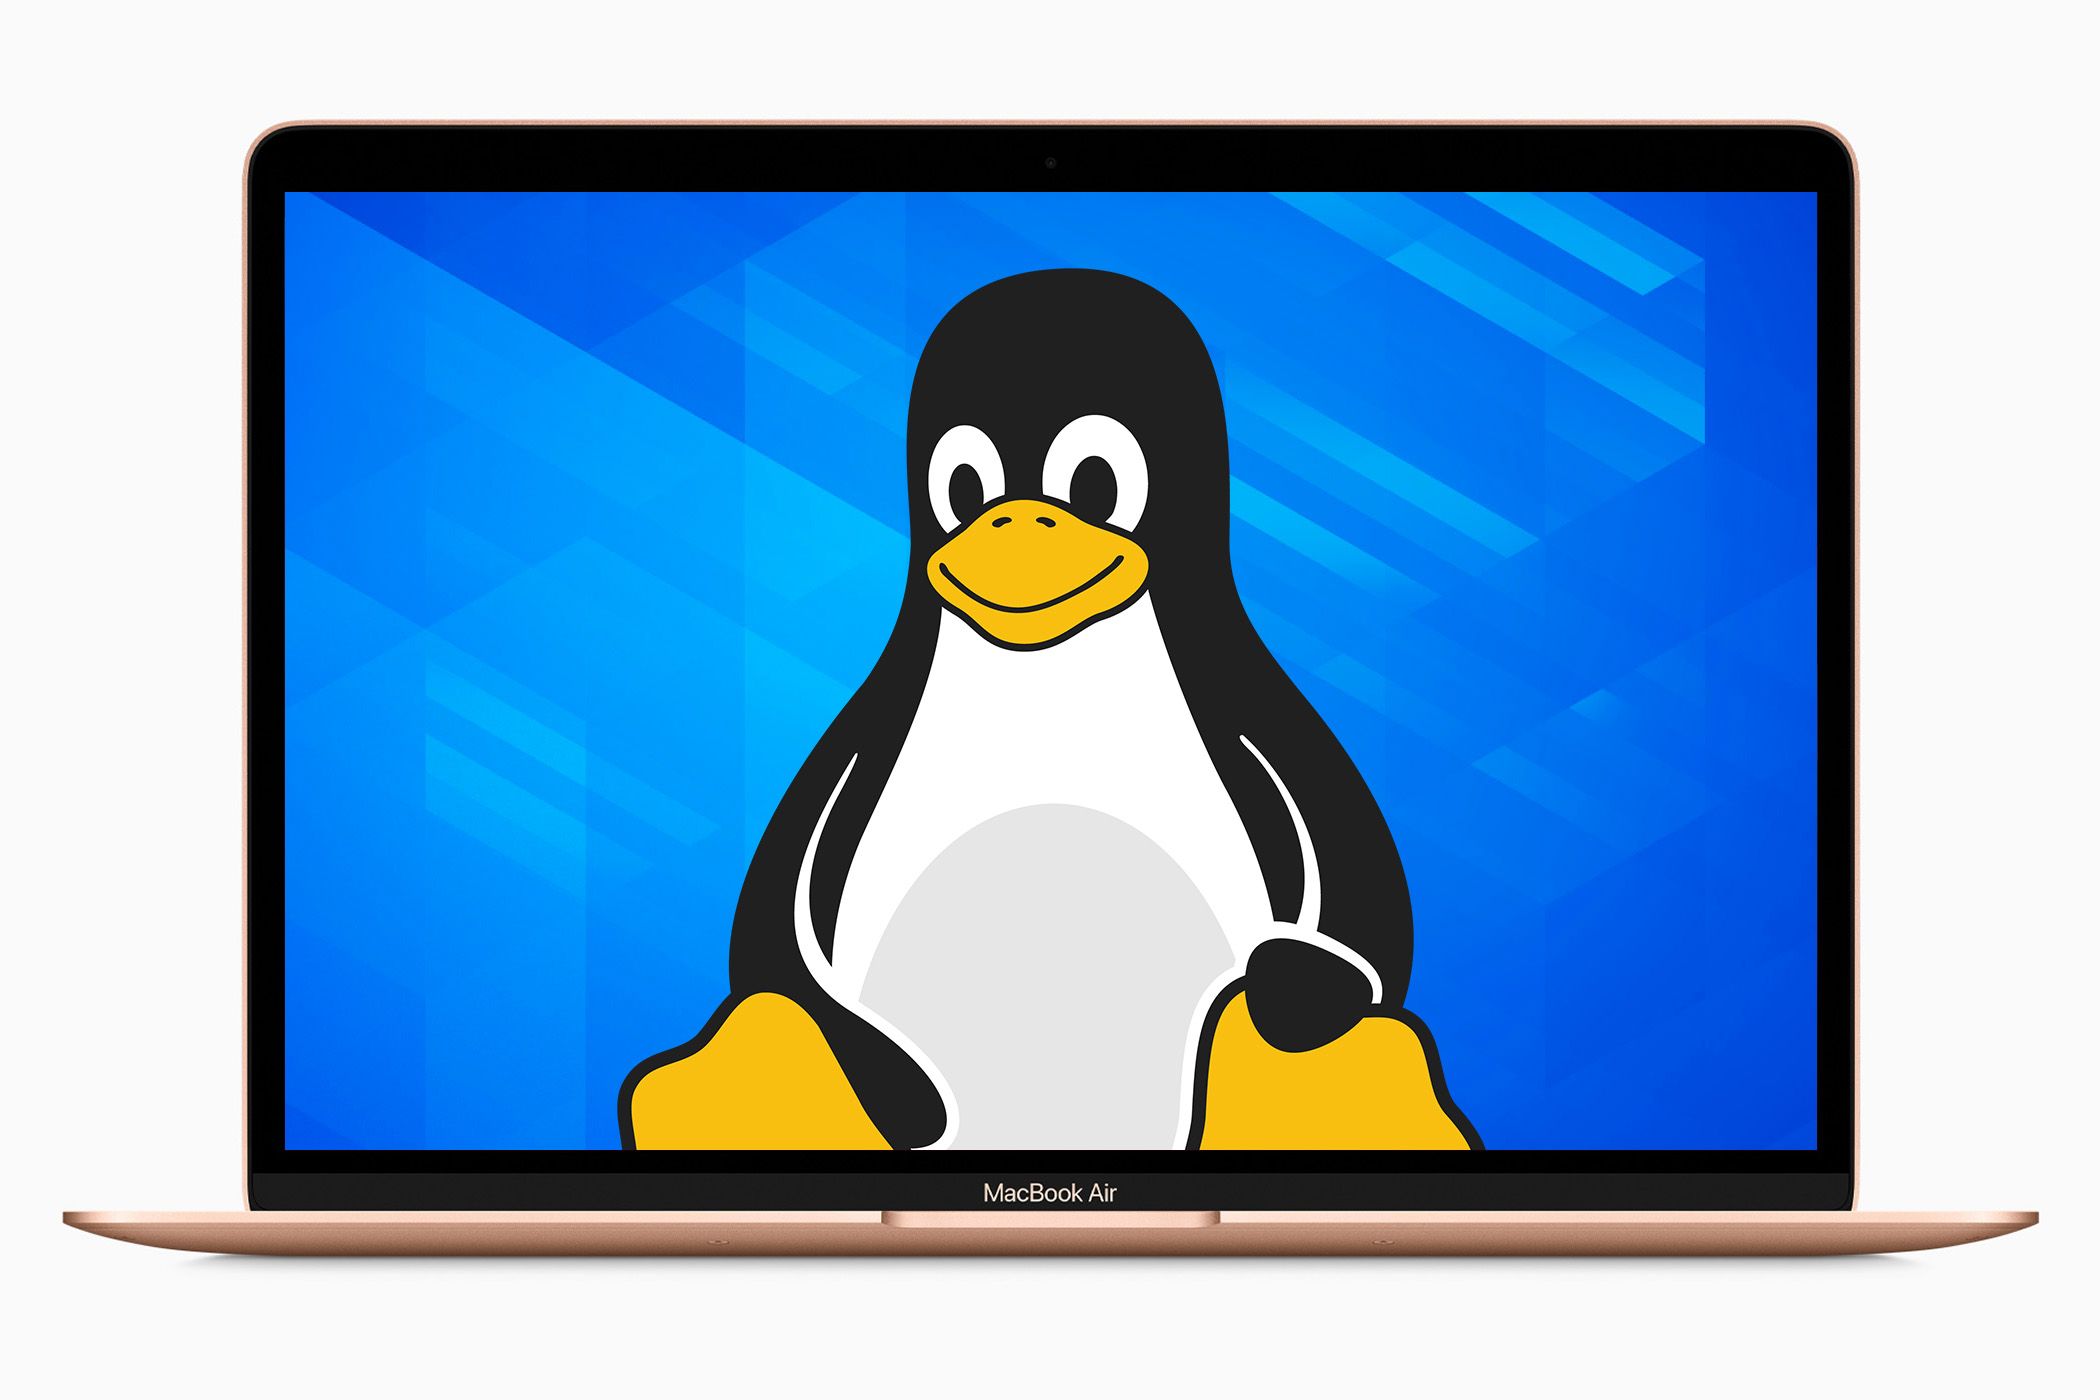 Photo of a MacBook Air with Tux the Linux Penguin on the screen